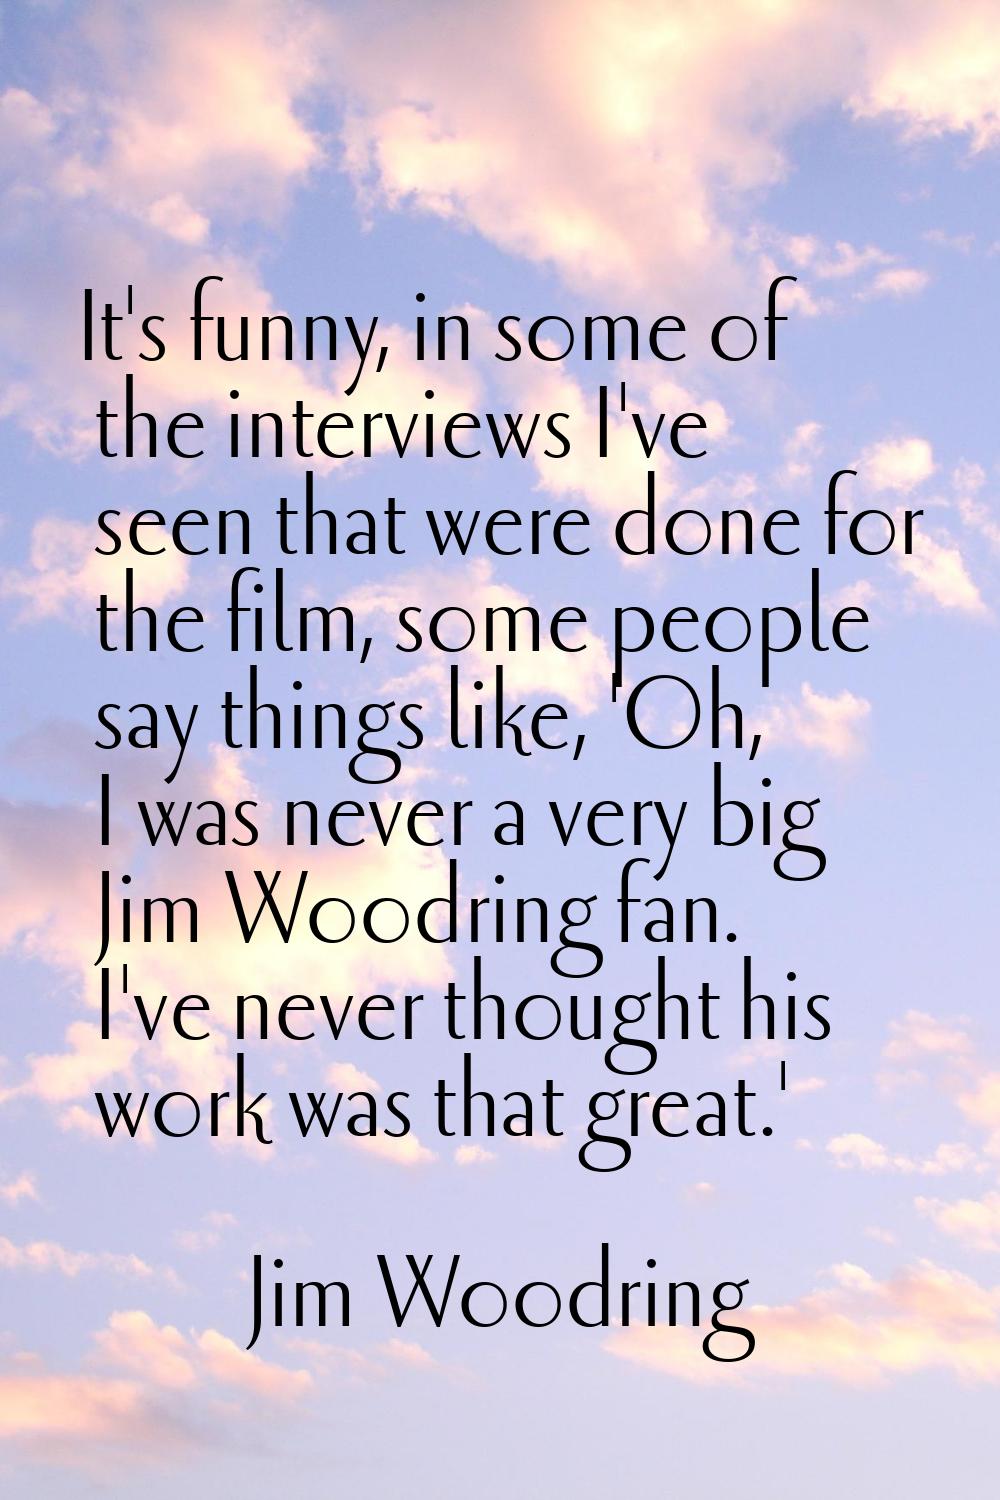 It's funny, in some of the interviews I've seen that were done for the film, some people say things